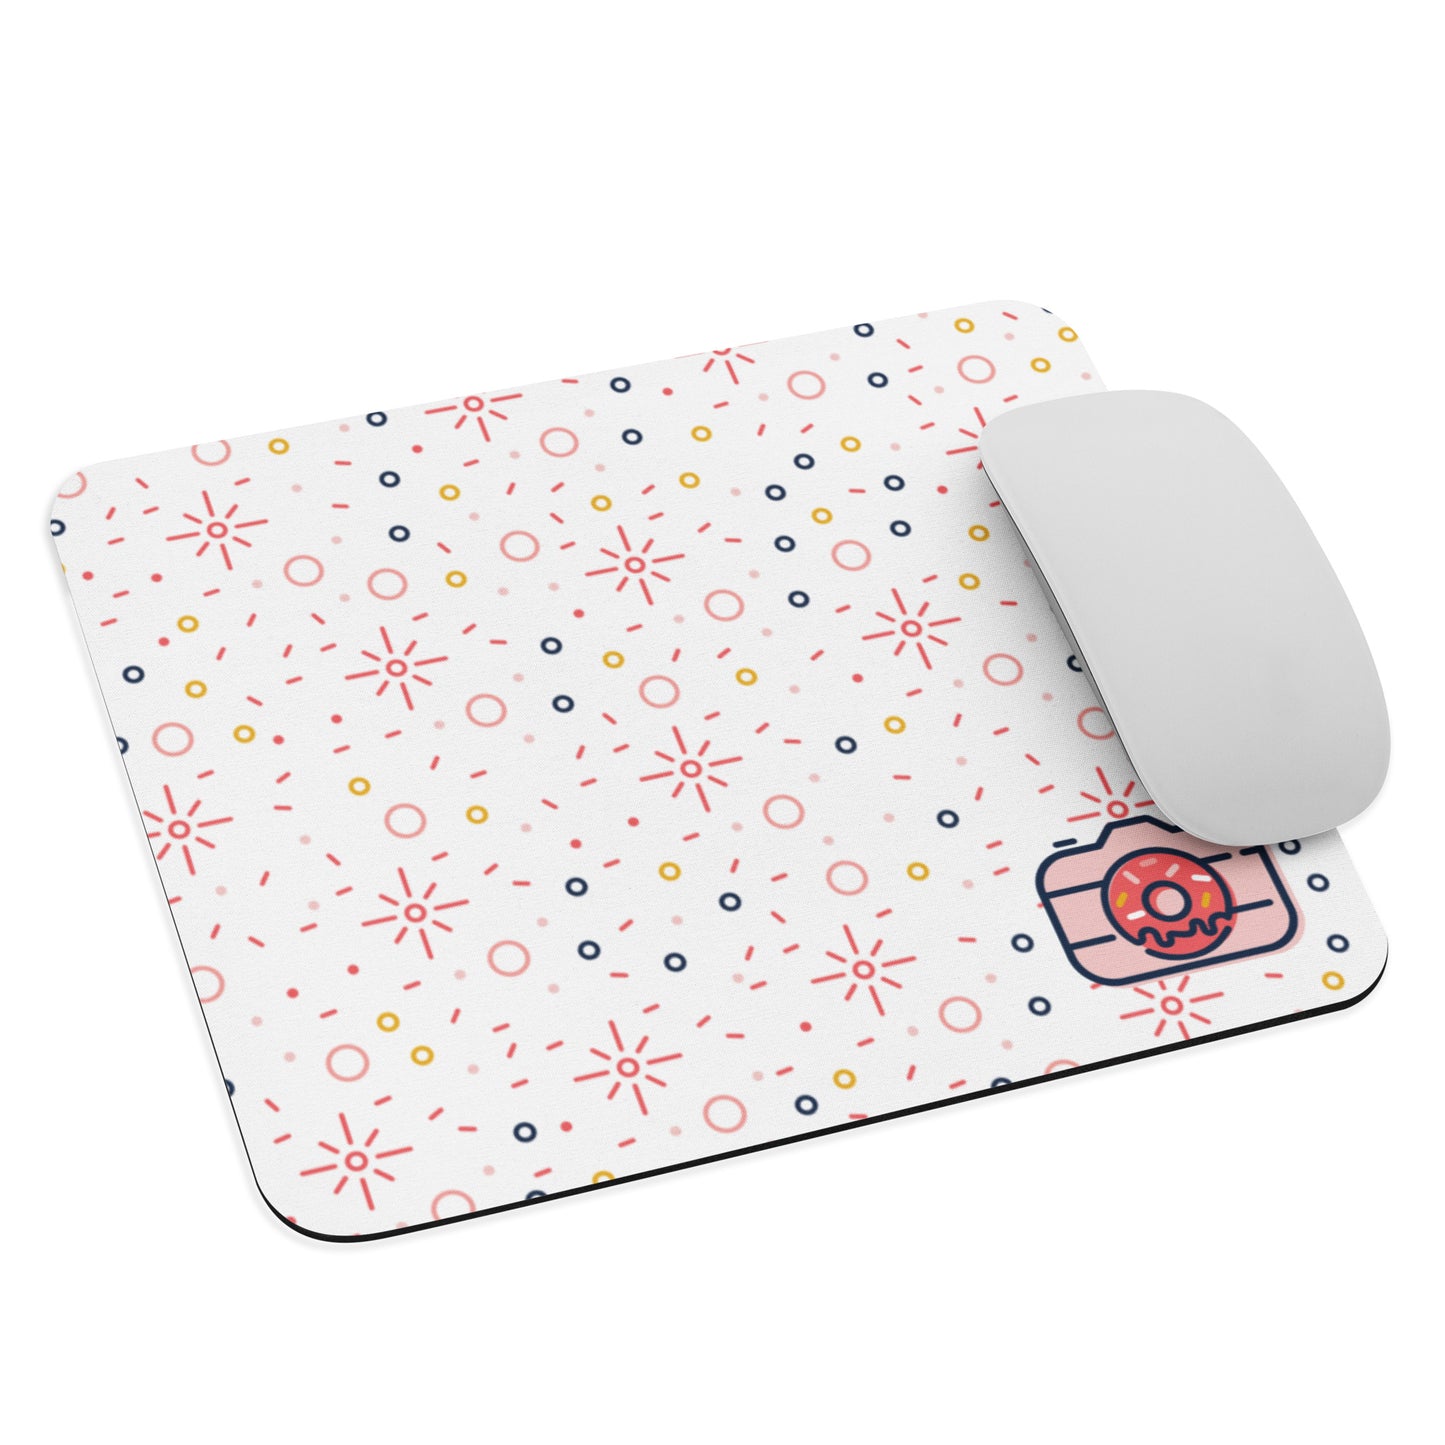 Pretty Focused Mouse Pad